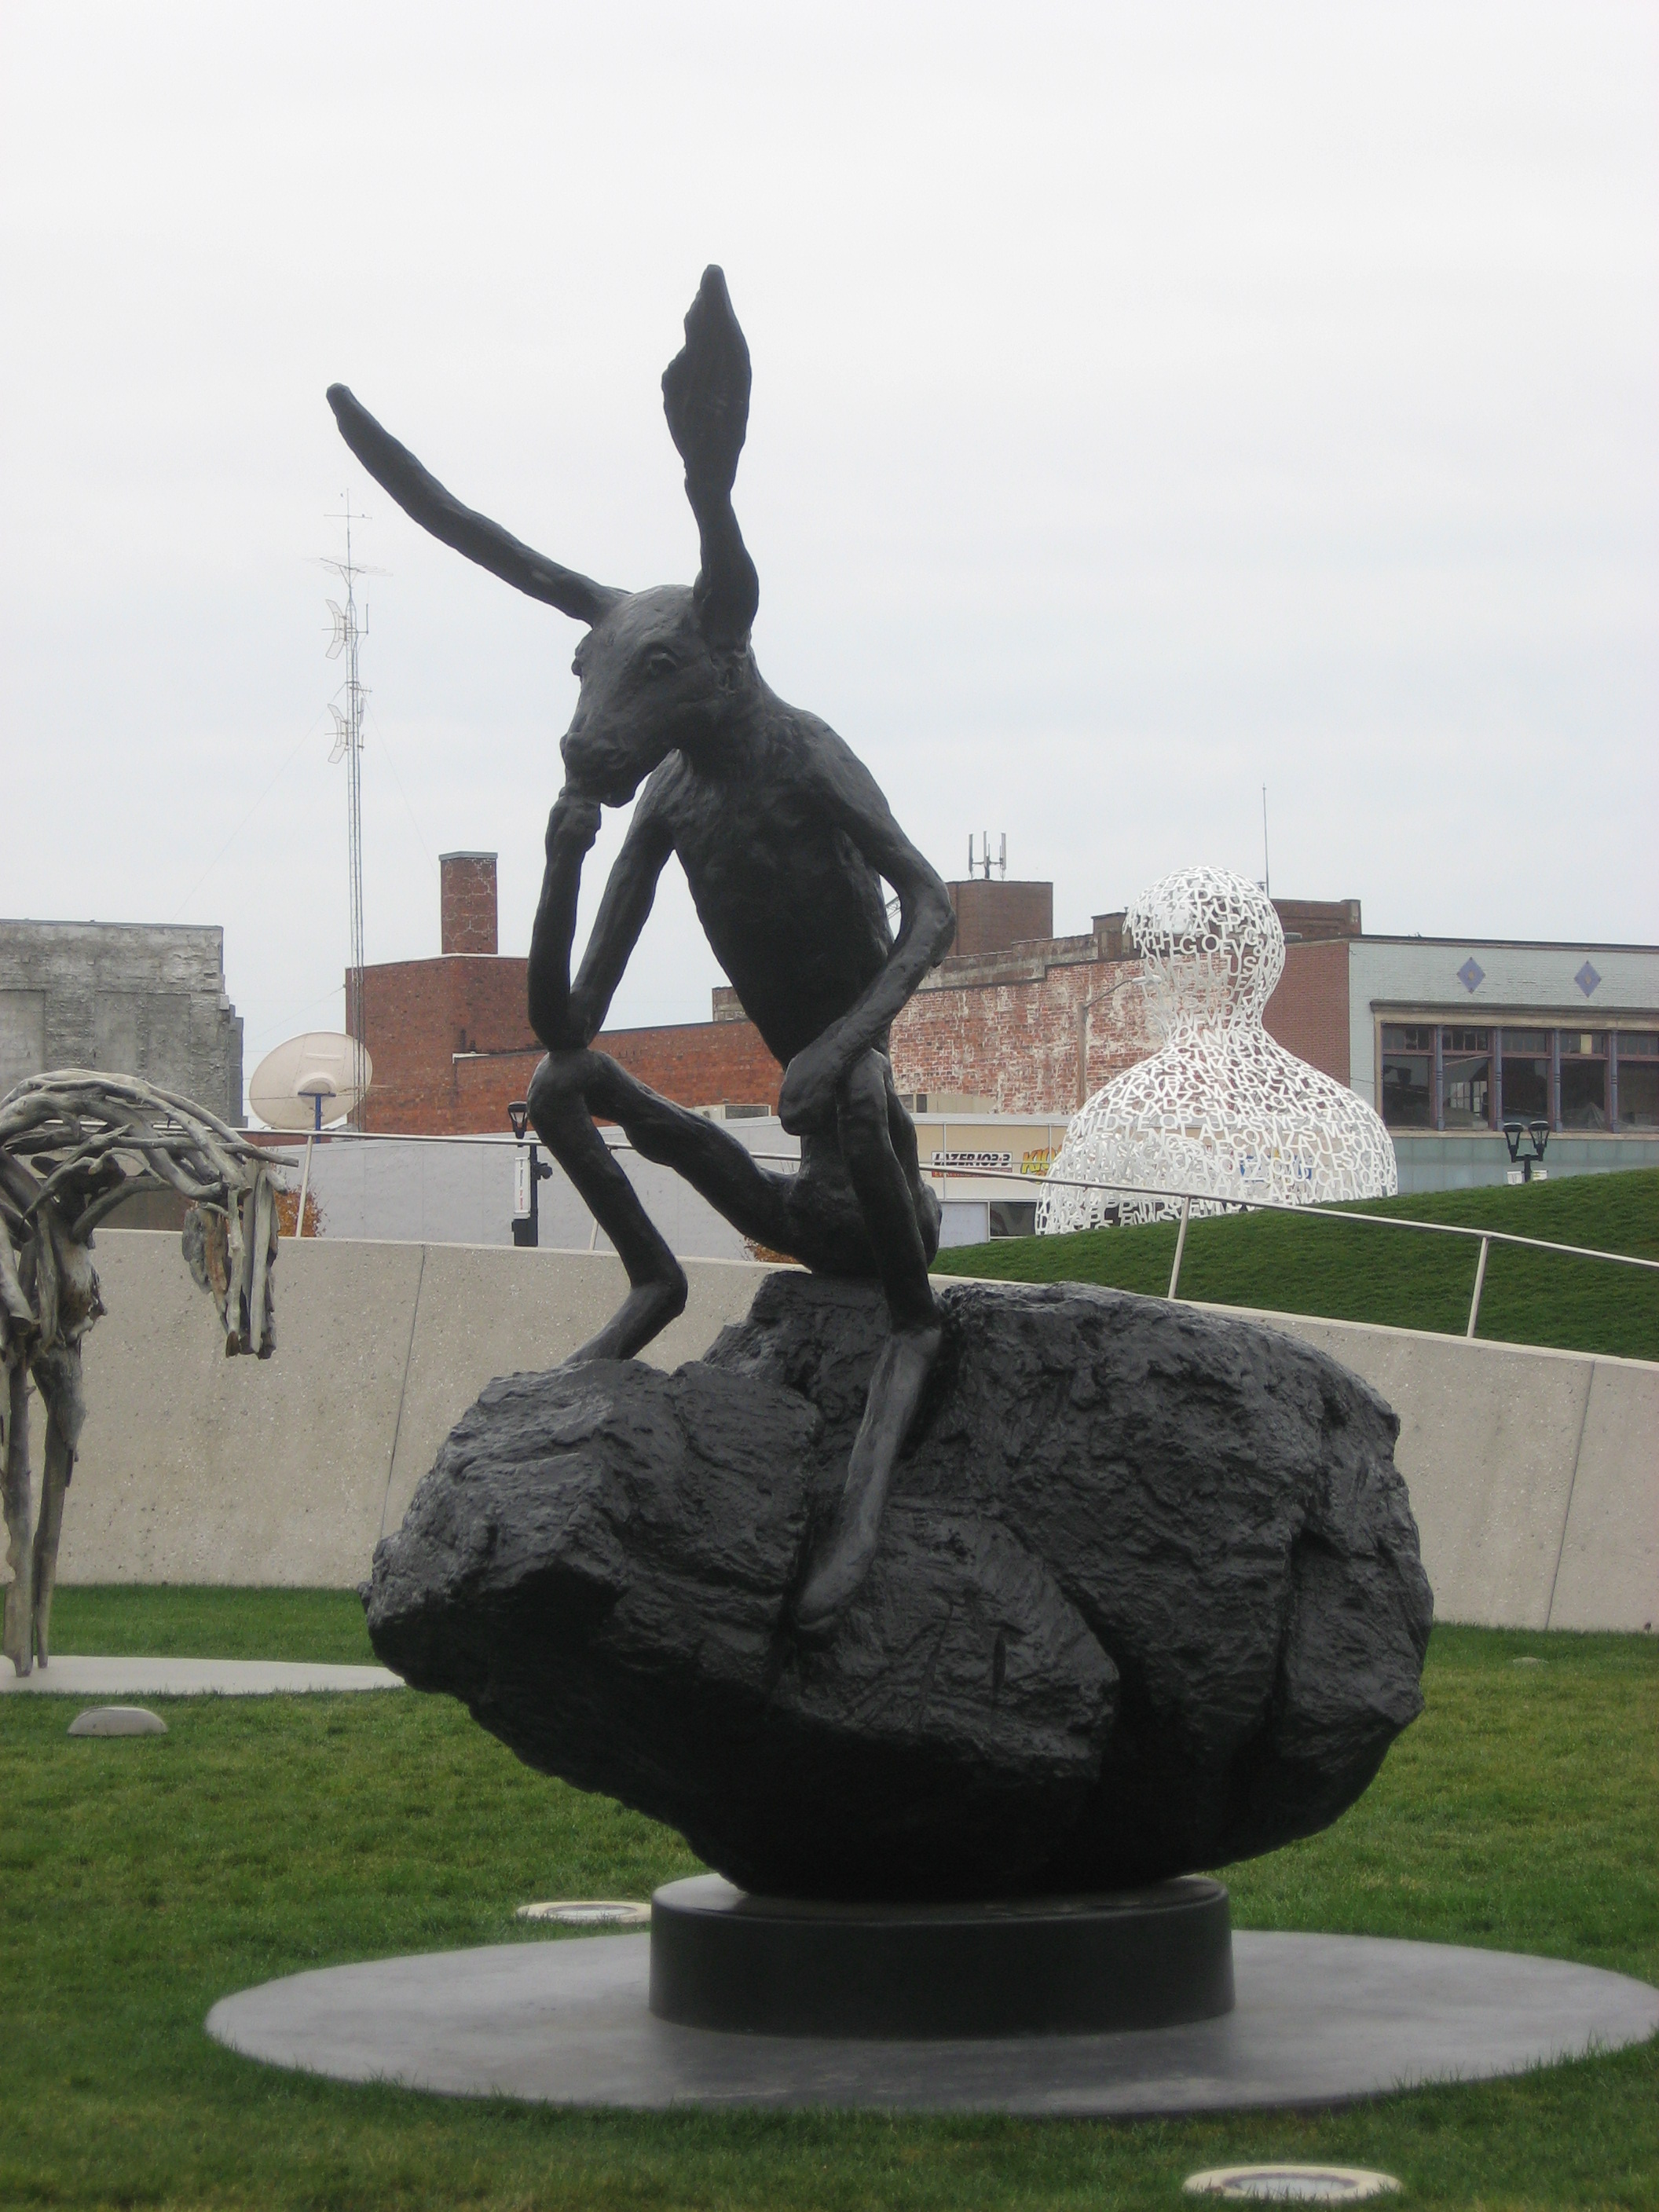 John And Mary Pappajohn Sculpture Park Des Moines Ia Image